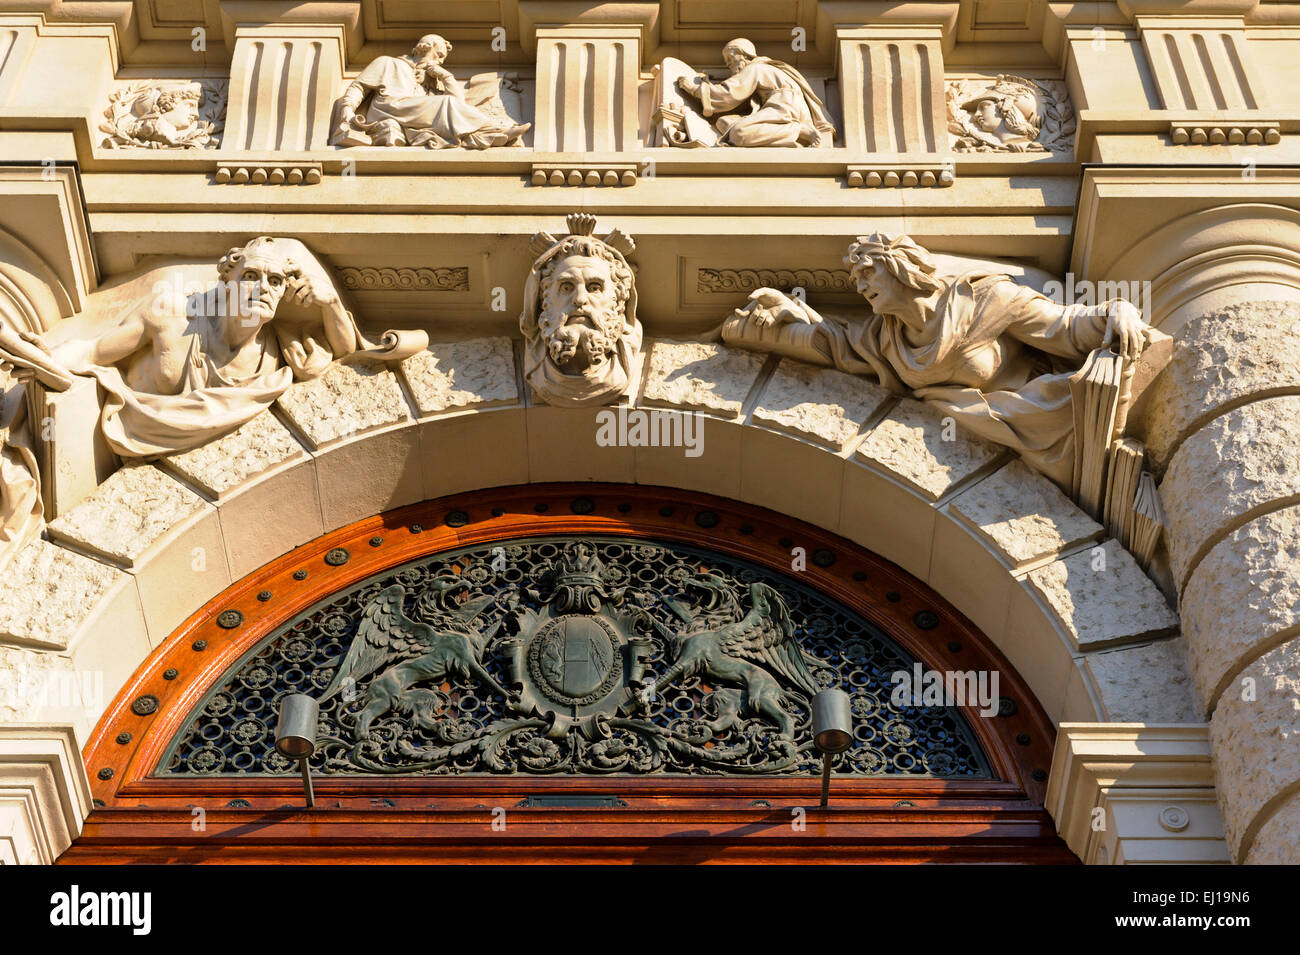 The decorative facade of the Museum of Art History, Vienna, Austria. Stock Photo